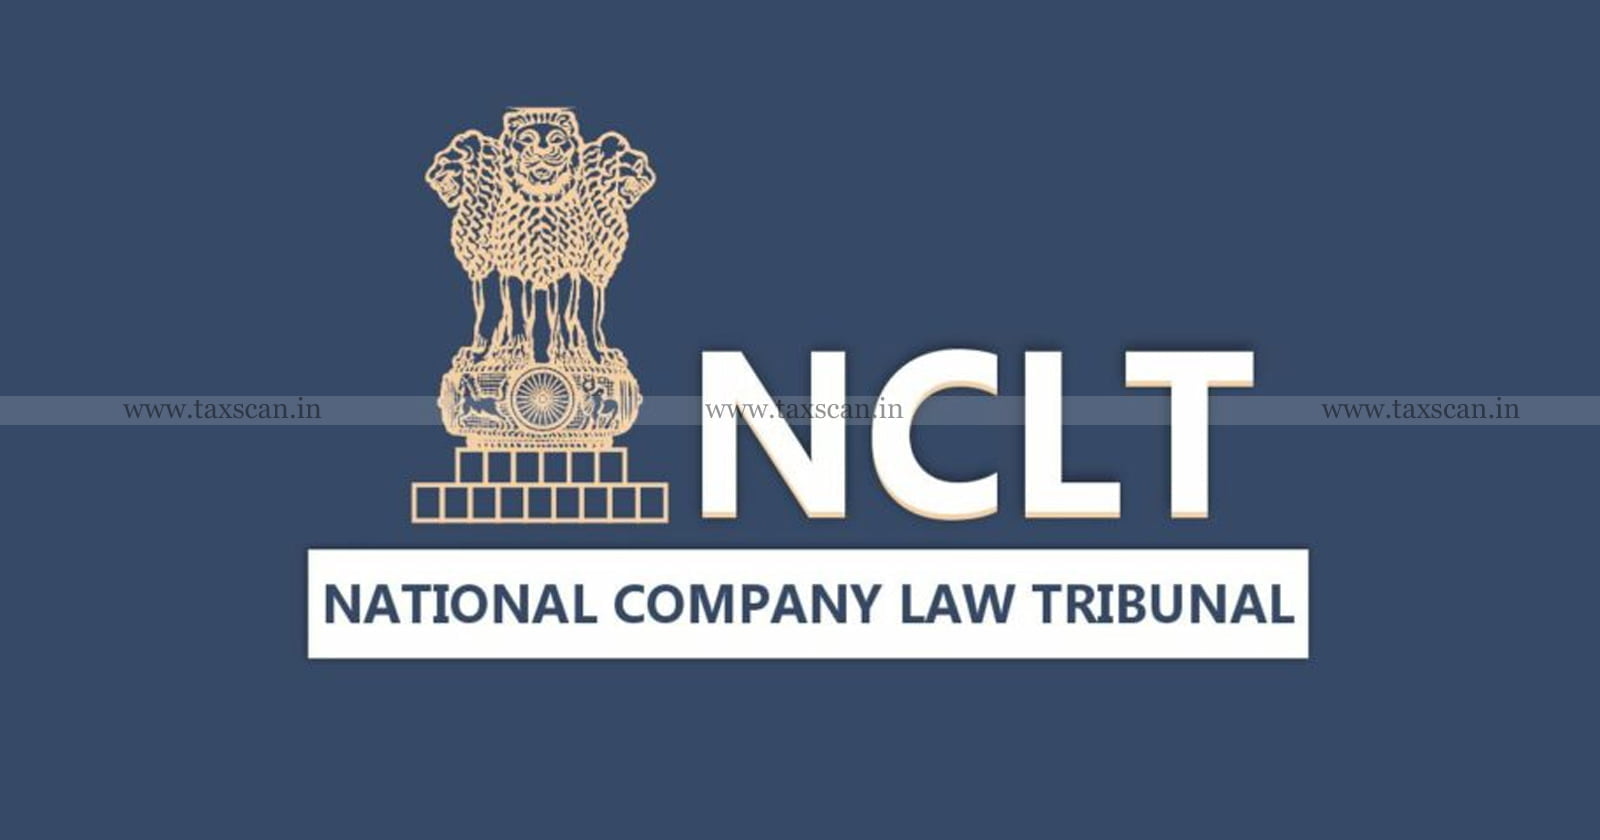 Claim of Return of Stock from CD - Without any Solid Documentary Evidence is invalid - NCLAT - TAXSCAN